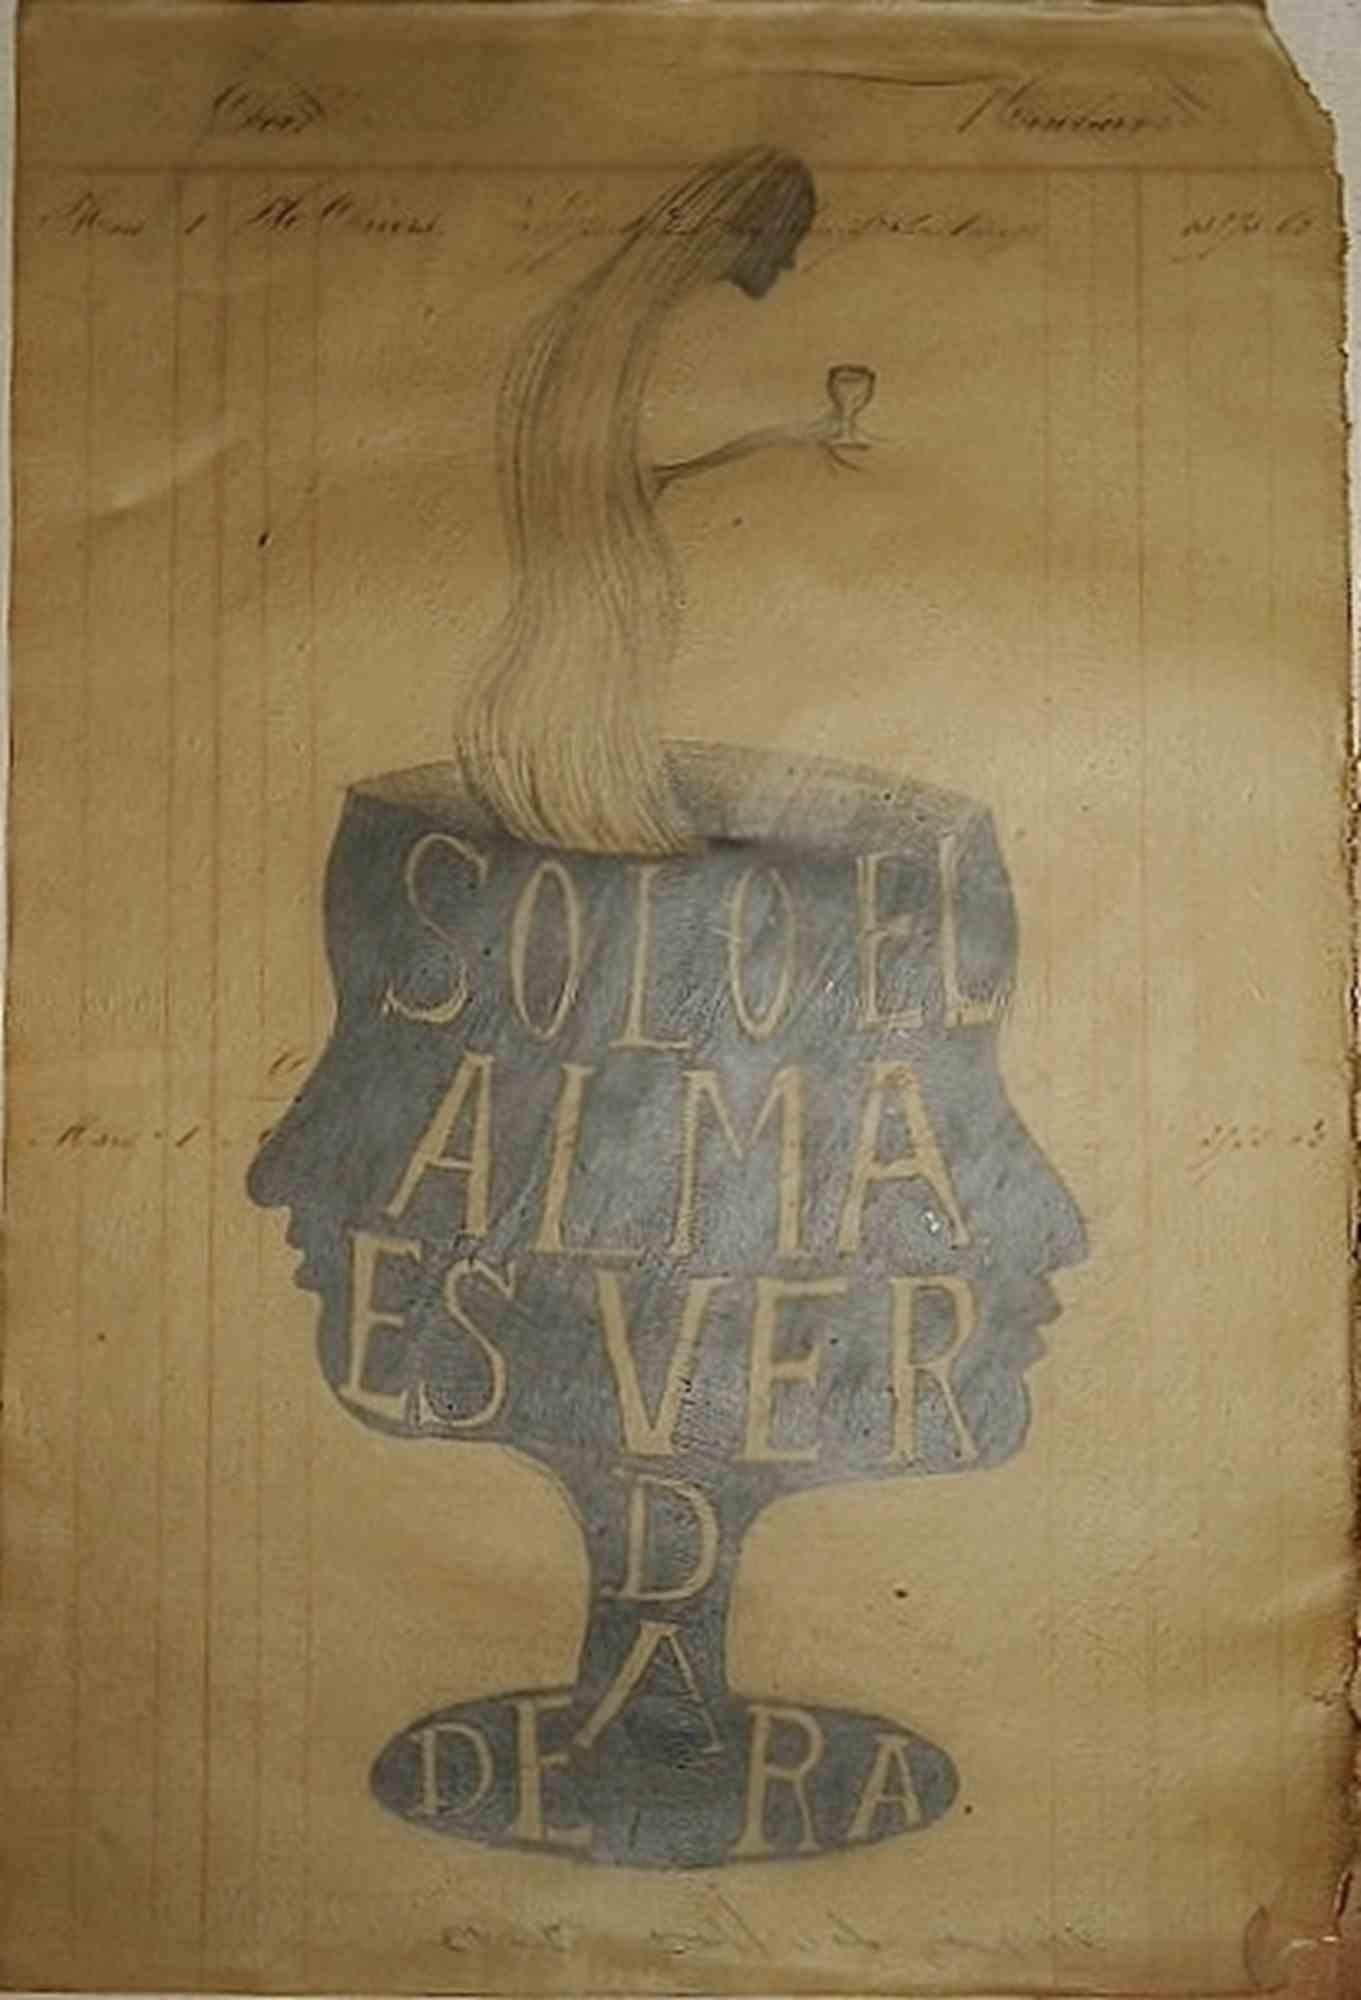 Solo el alma es verdadera is a contemporary artwork realized by Sandra Vásquez de la Horra in 2013.

Pencil on waxed paper.

Hand signed on the back.

Sandra Vasquez De La Horra was born in Viña del Mar in Chile in 1967. She studied visual